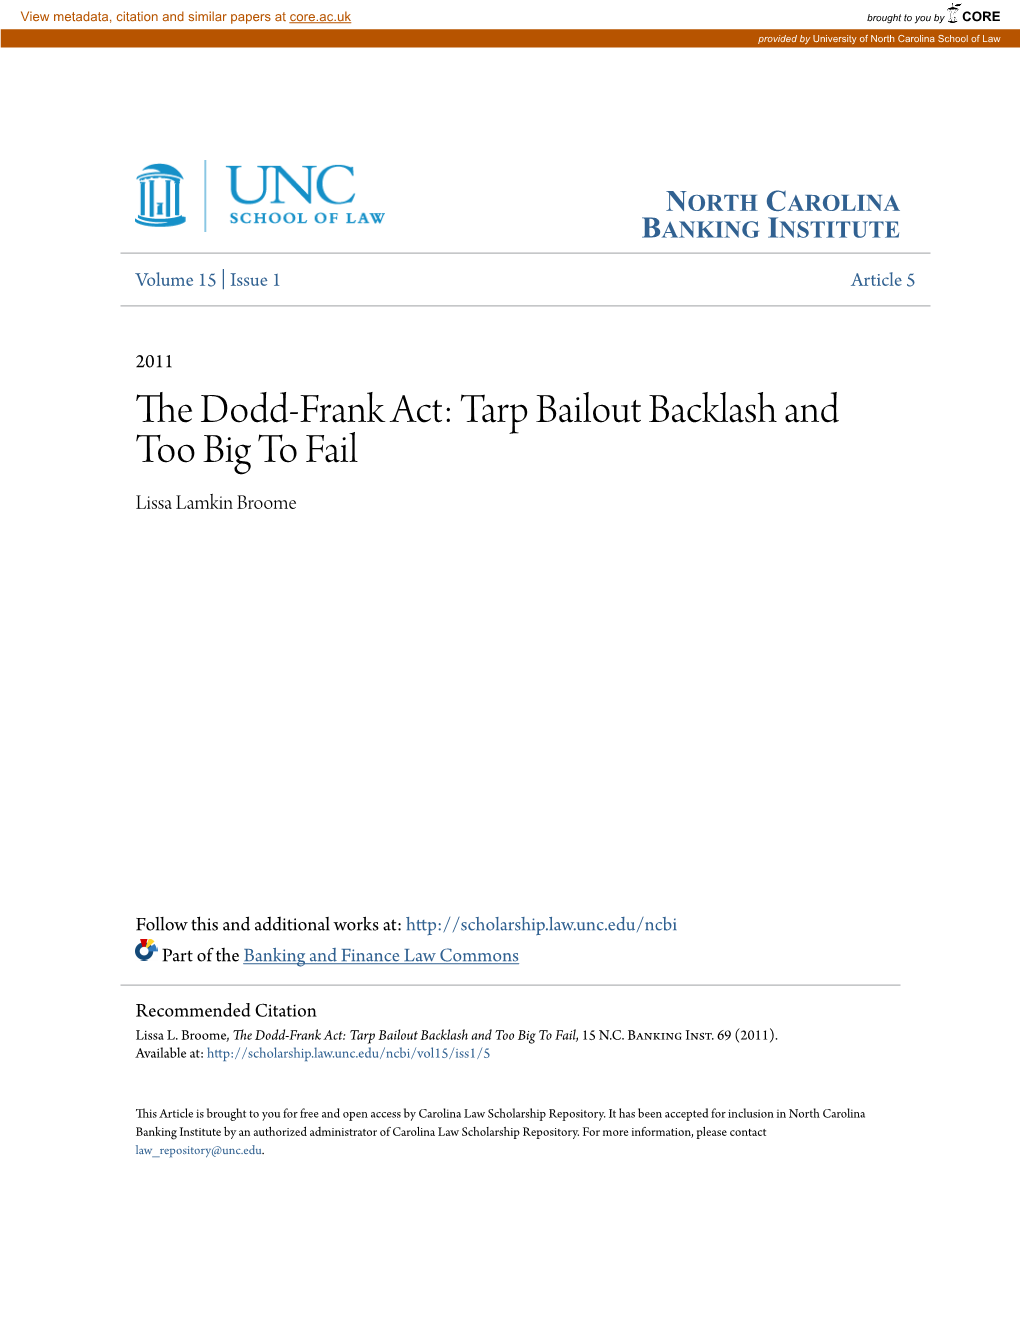 The Dodd-Frank Act: Tarp Bailout Backlash and Too Big to Fail, 15 N.C